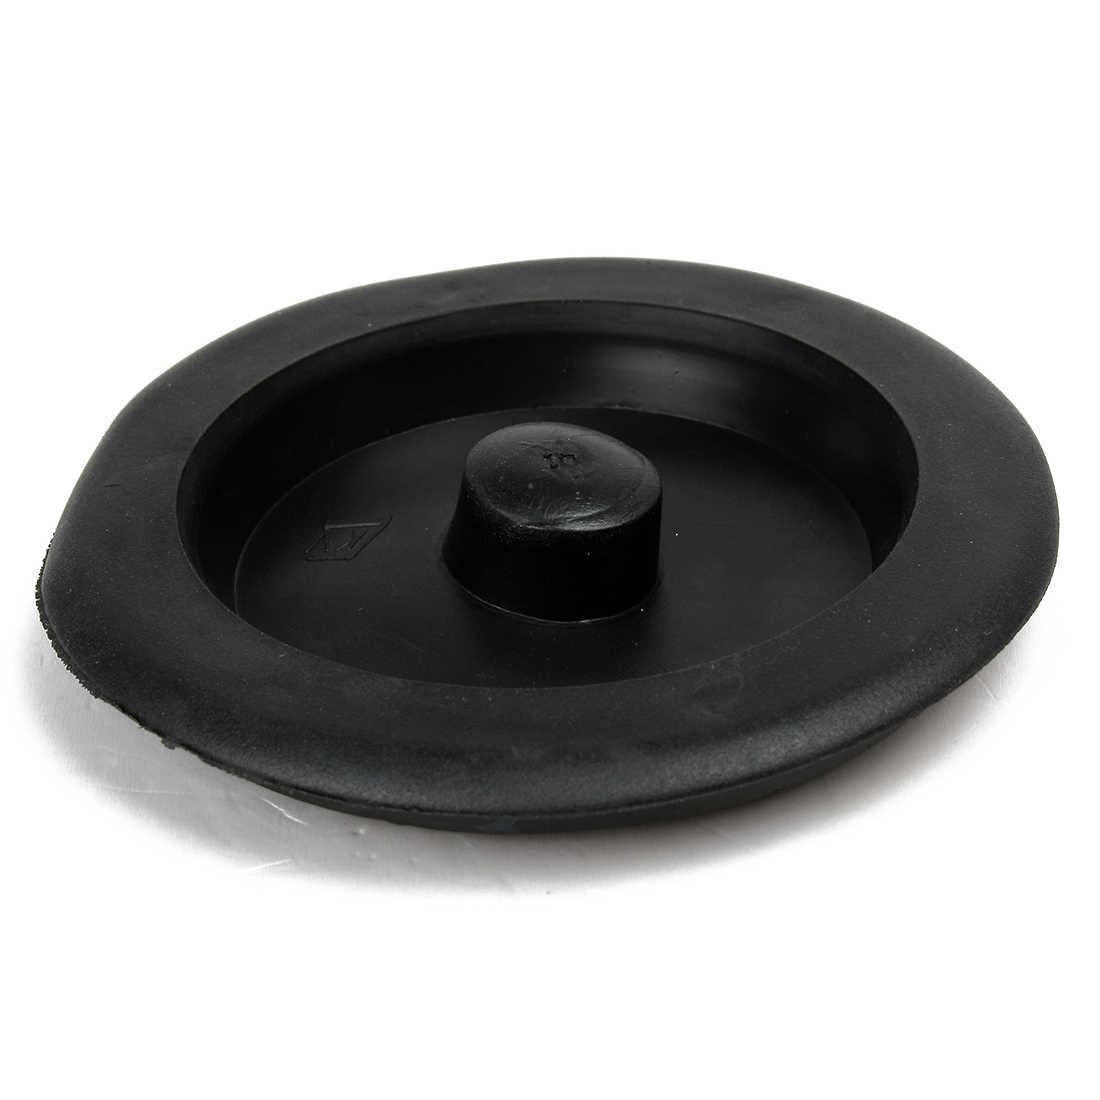 Kitchen Washing Basin Sink Rubber Covers Water Drain Stopper Draining Plug